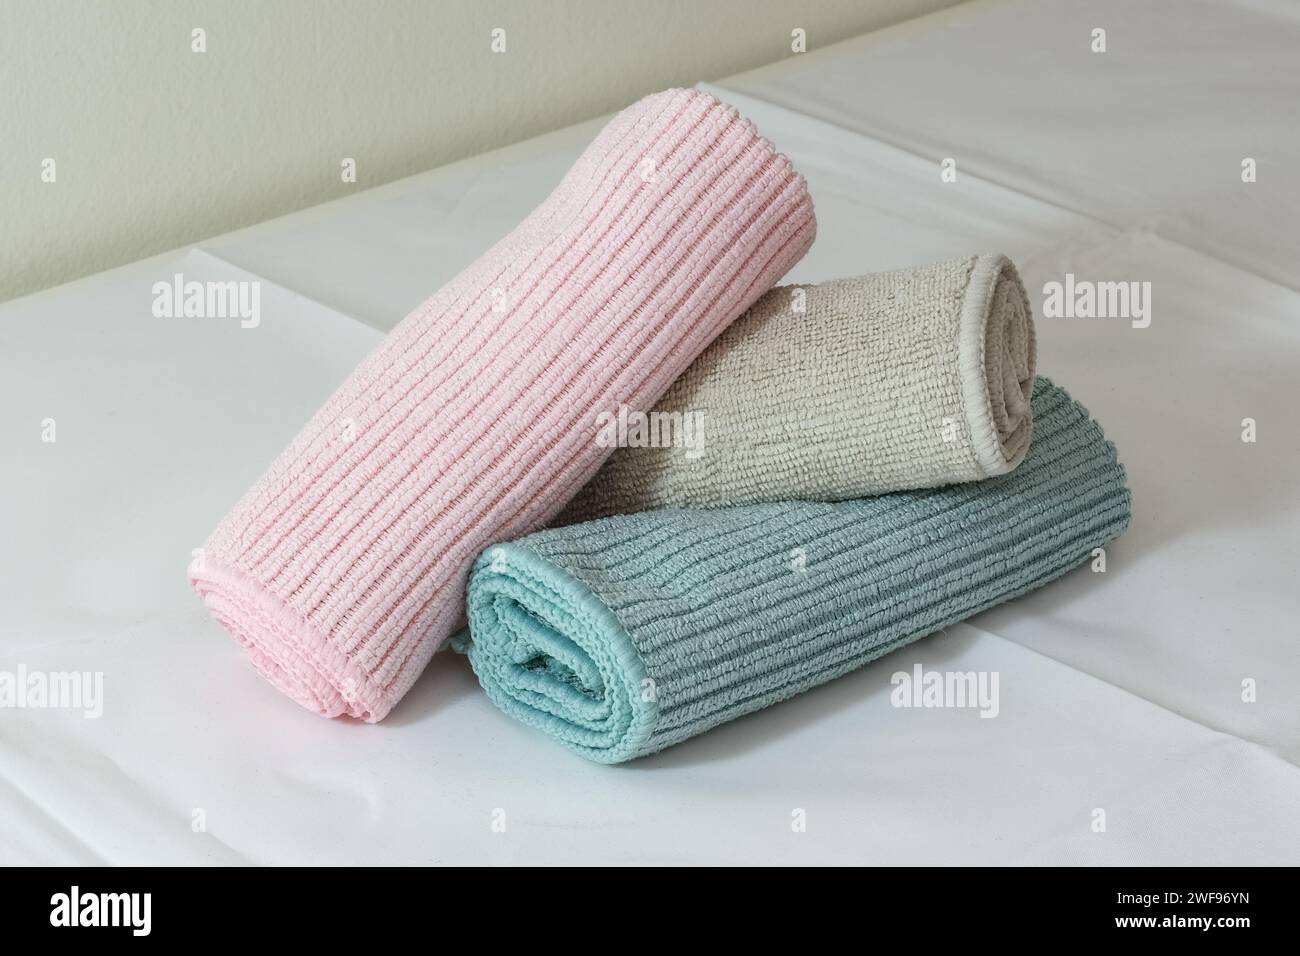 Microfiber cleaning cloths in pink, beige and green colors on a table ready for cleaning. White background Stock Photo